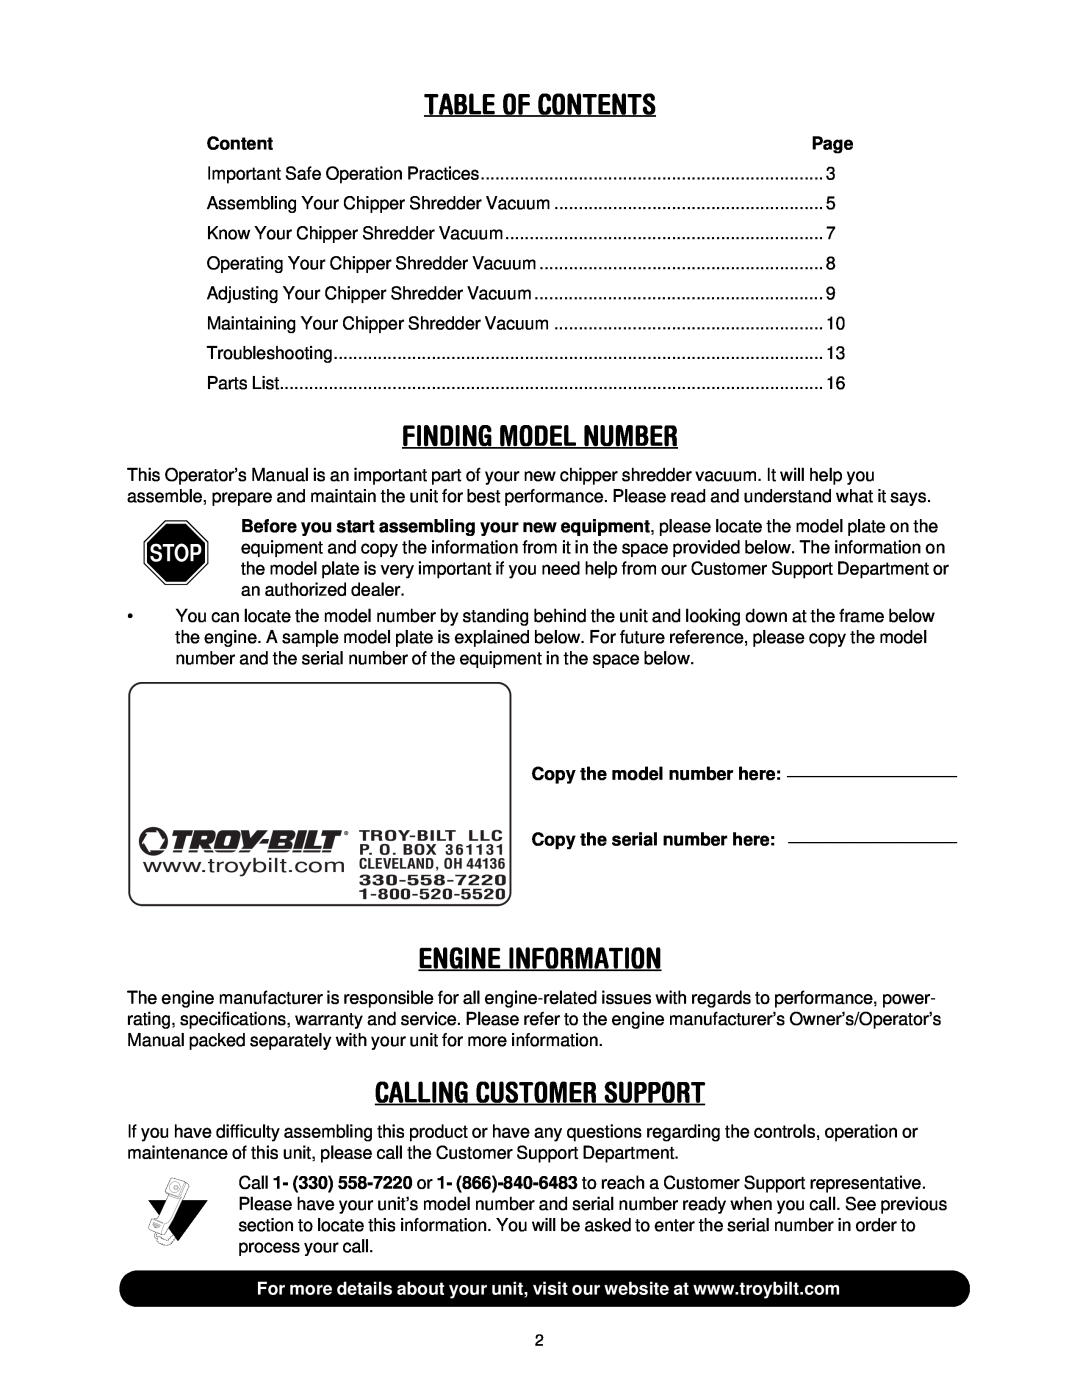 Troy-Bilt CSV206 manual Table Of Contents, Finding Model Number, Engine Information, Calling Customer Support 